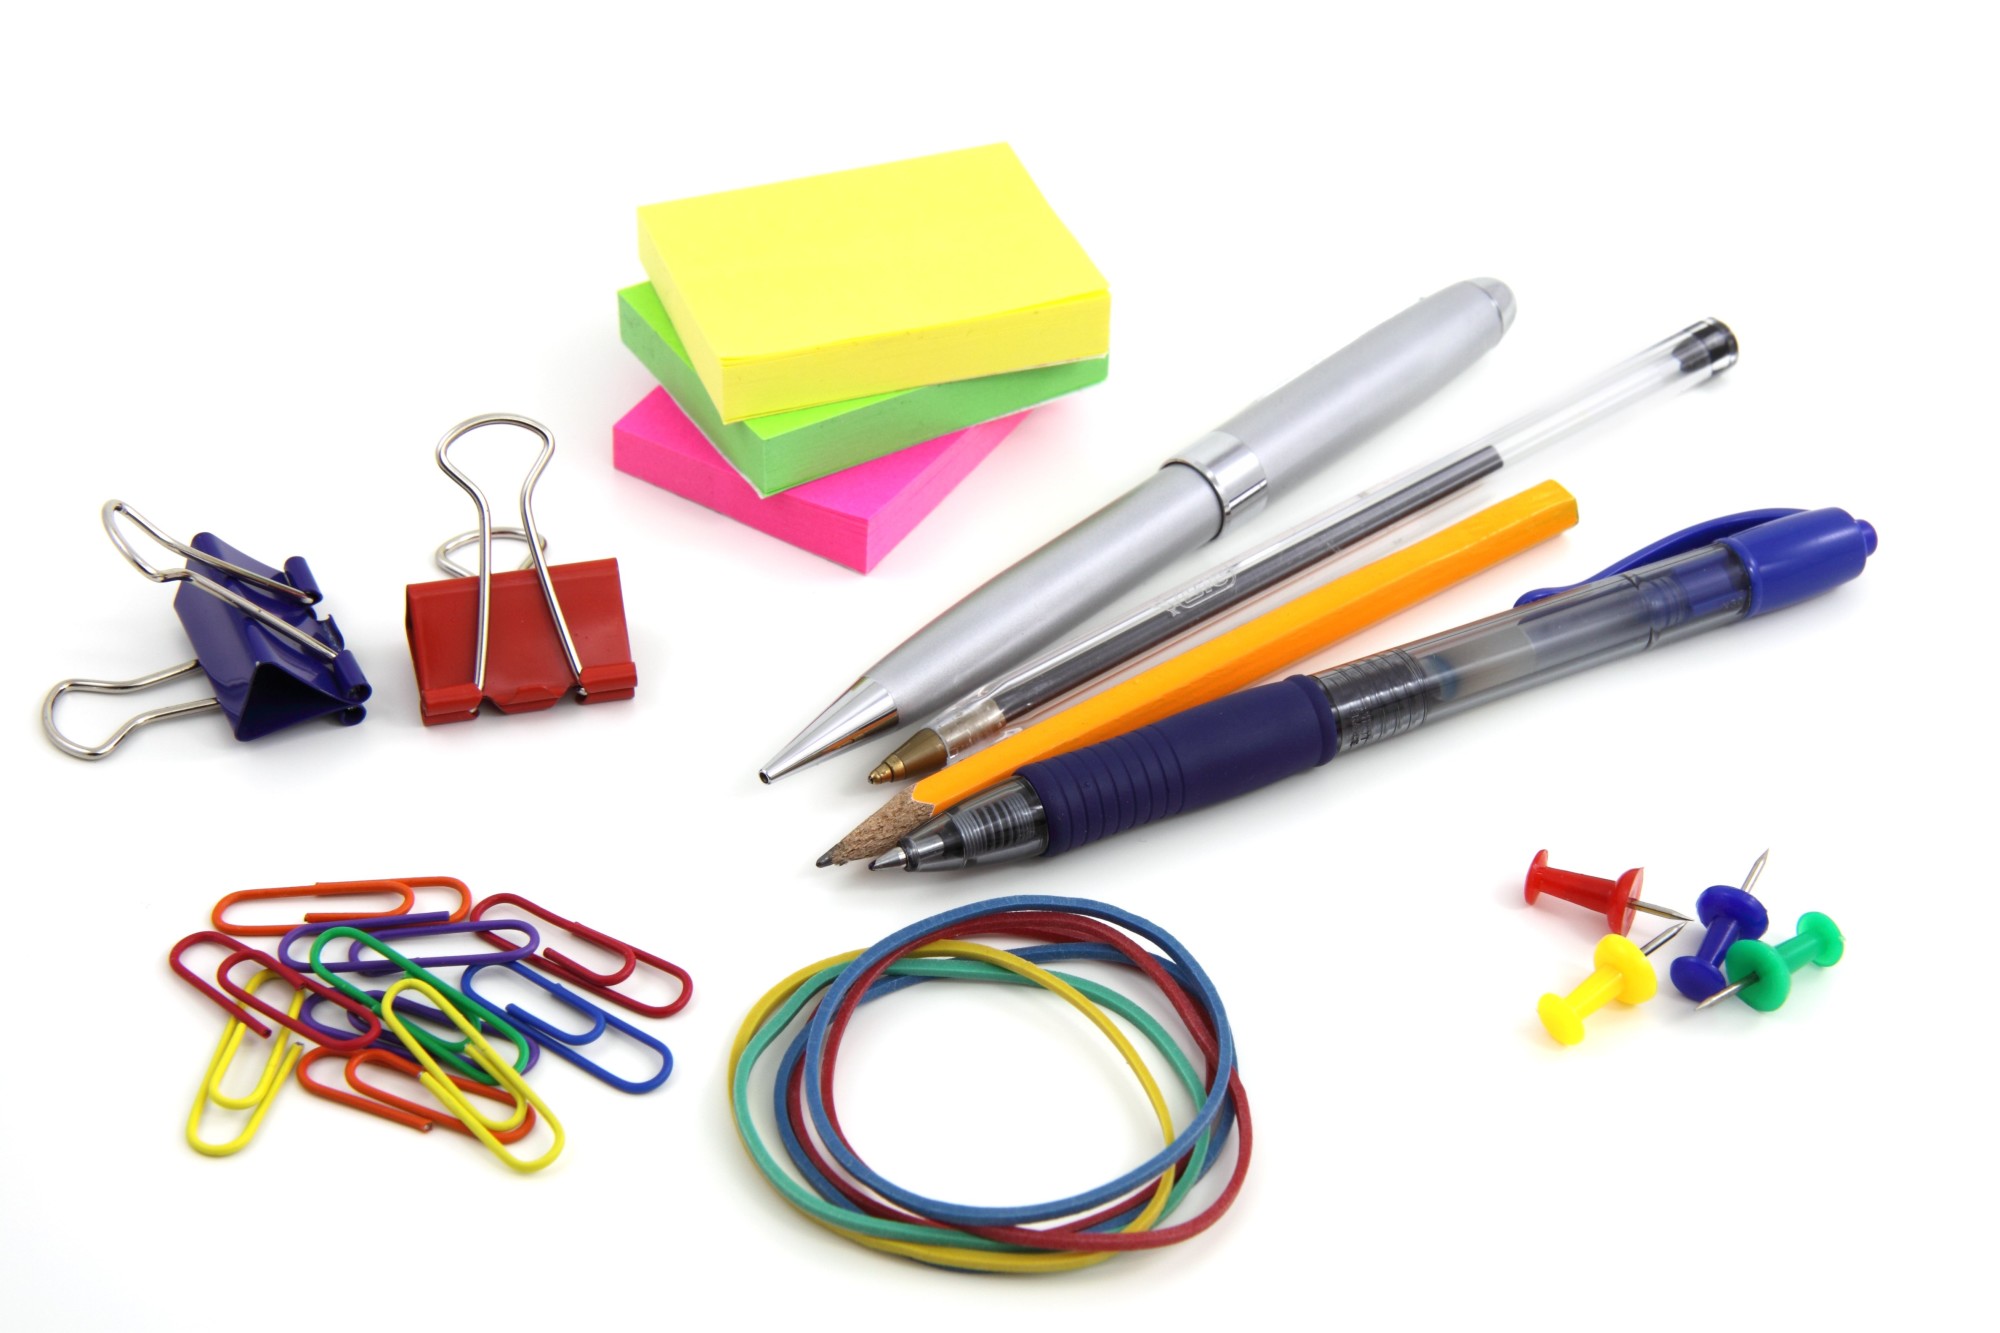 A List of Some Must Have Office Supplies for Any Work Space